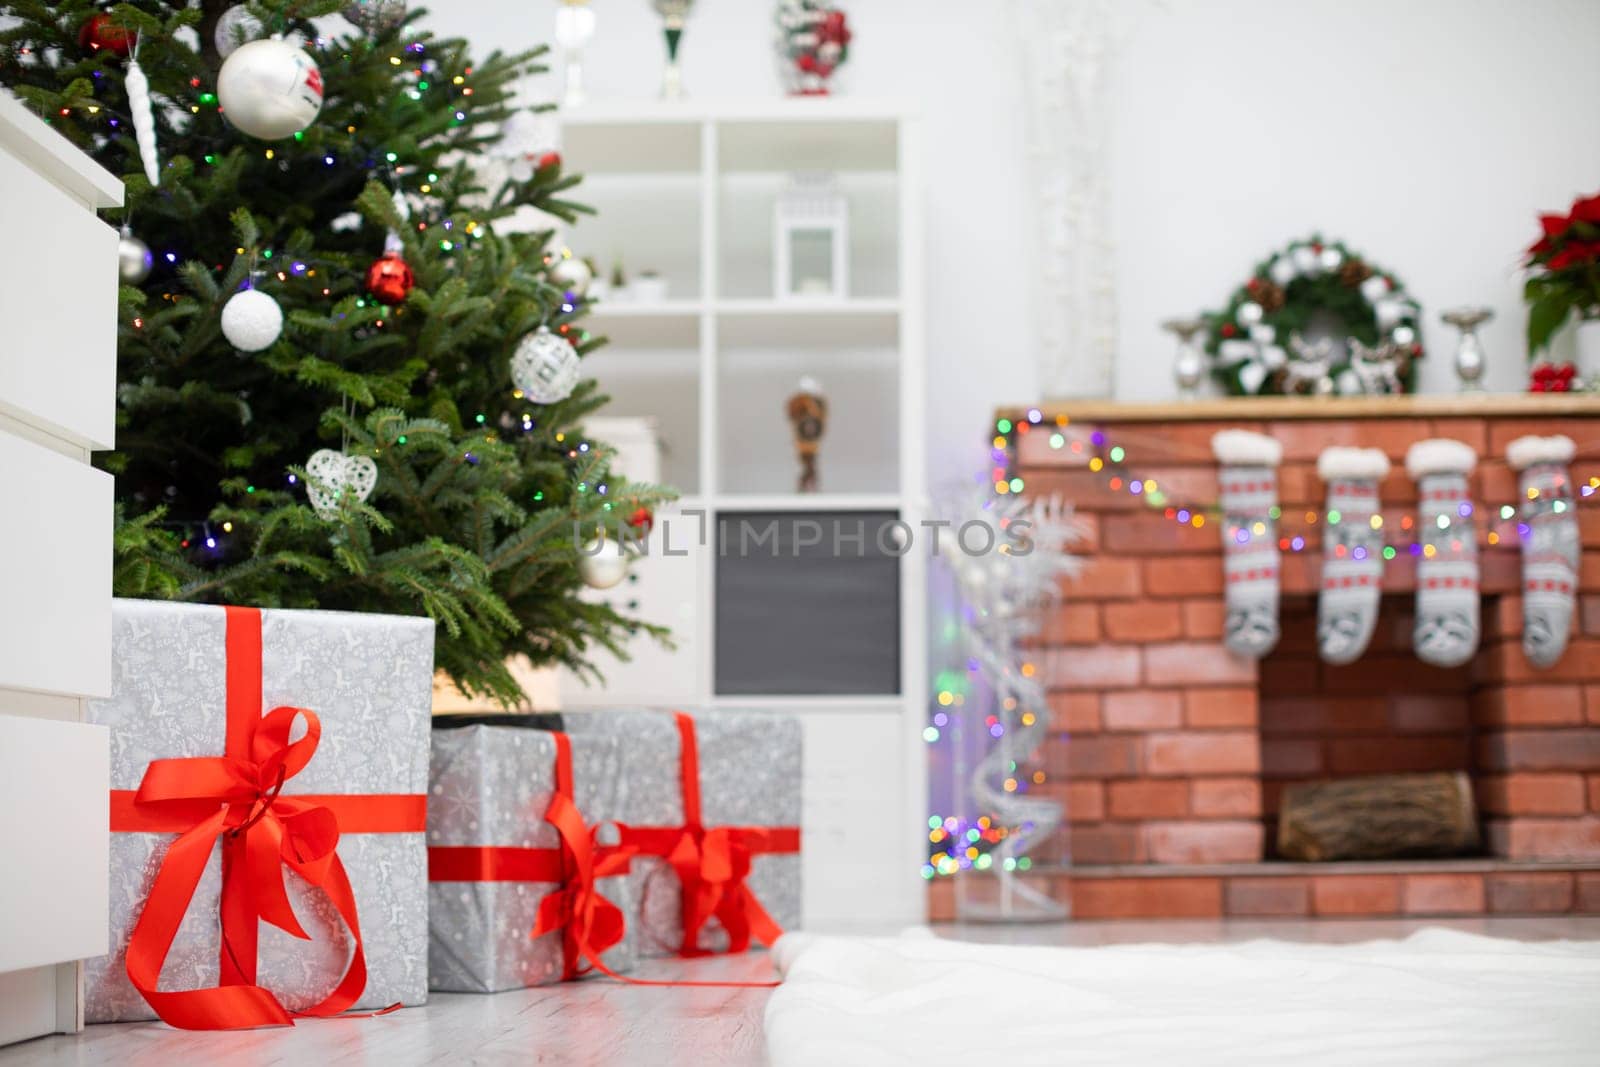 Decorated room with gifts under the Christmas tree. Fireplace with decorations in background.